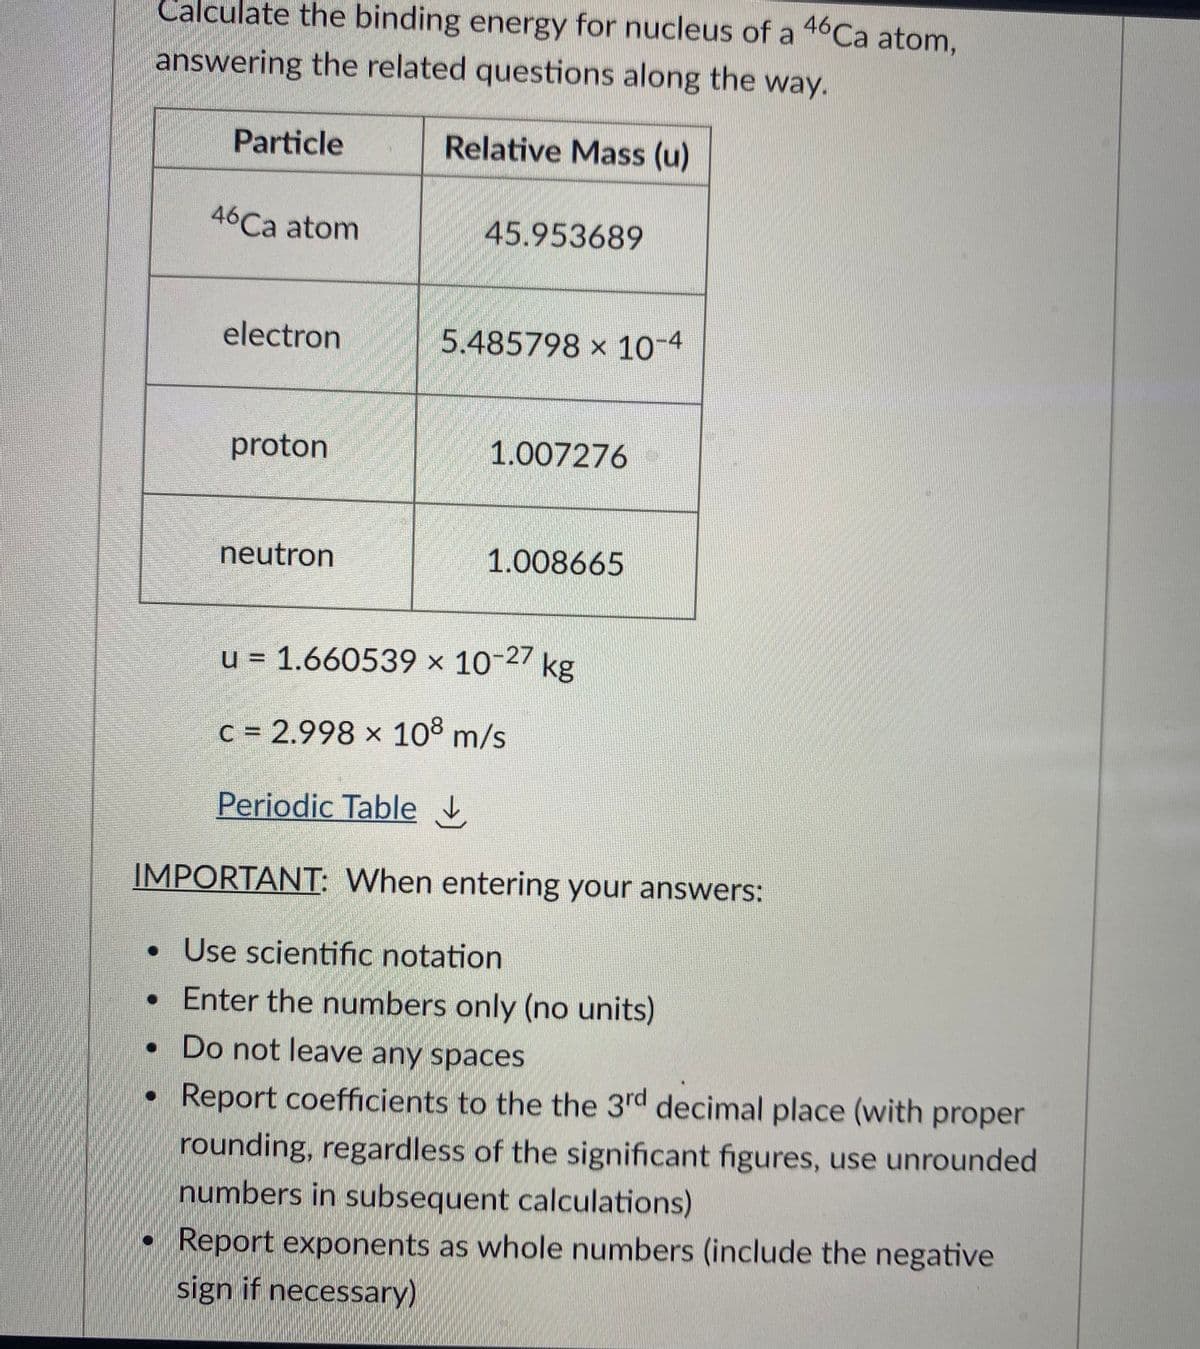 Calculate the binding energy for nucleus of a 46Ca atom,
answering the related questions along the way.
Particle
Relative Mass (u)
46Ca atom
45.953689
electron
5.485798 × 10-4
proton
1.007276
neutron
1.008665
u = 1.660539 x 10-27 kg
c = 2.998 x 10° m/s
Periodic Table
IMPORTANT: When entering your answers:
• Use scientific notation
• Enter the numbers only (no units)
• Do not leave any spaces
Report coefficients to the the 3rd decimal place (with proper
rounding, regardless of the significant figures, use unrounded
numbers in subsequent calculations)
Report exponents as whole numbers (include the negative
sign if necessary)
